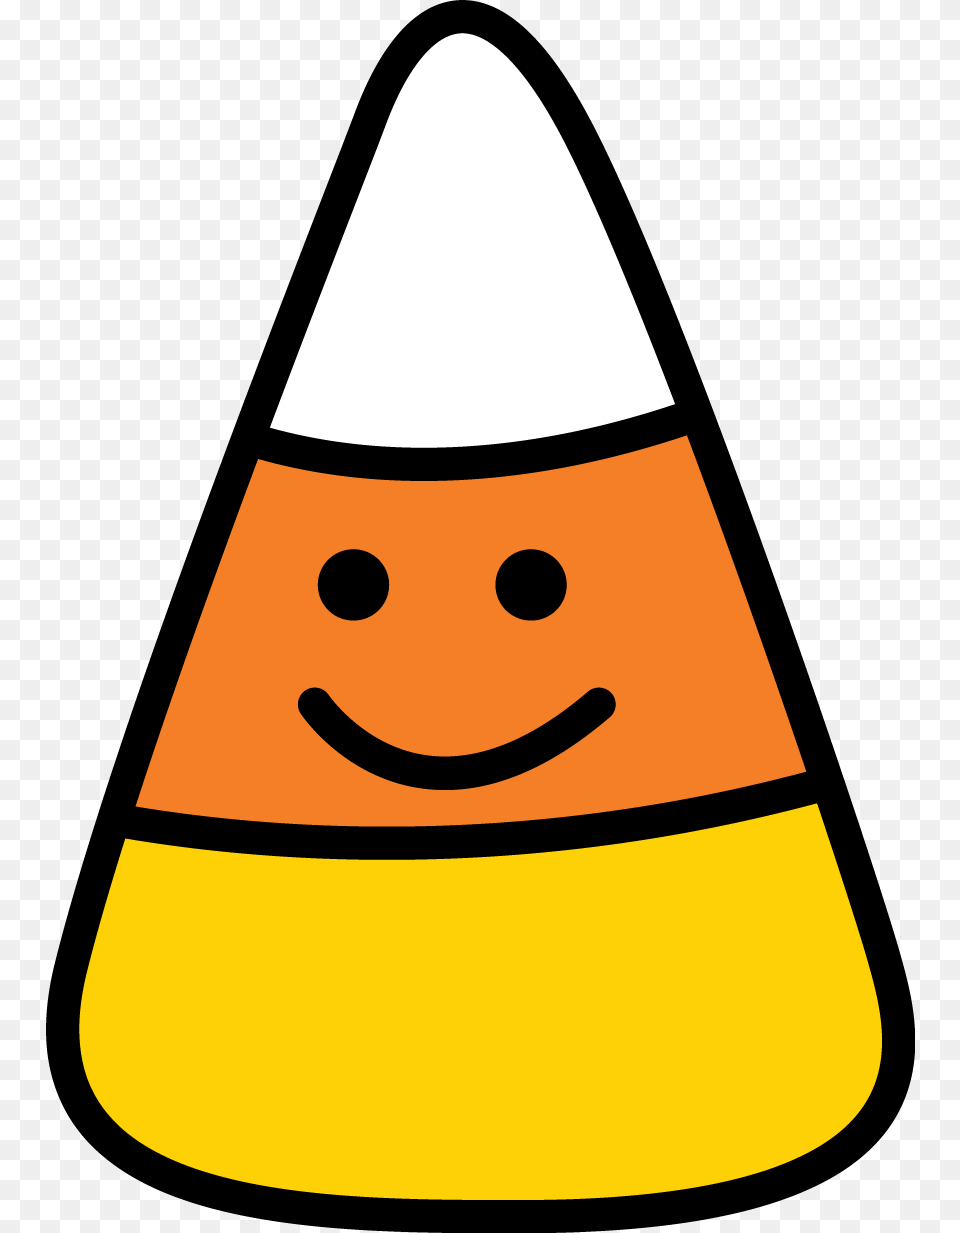 Candy Corn, Food, Sweets, Cone Png Image